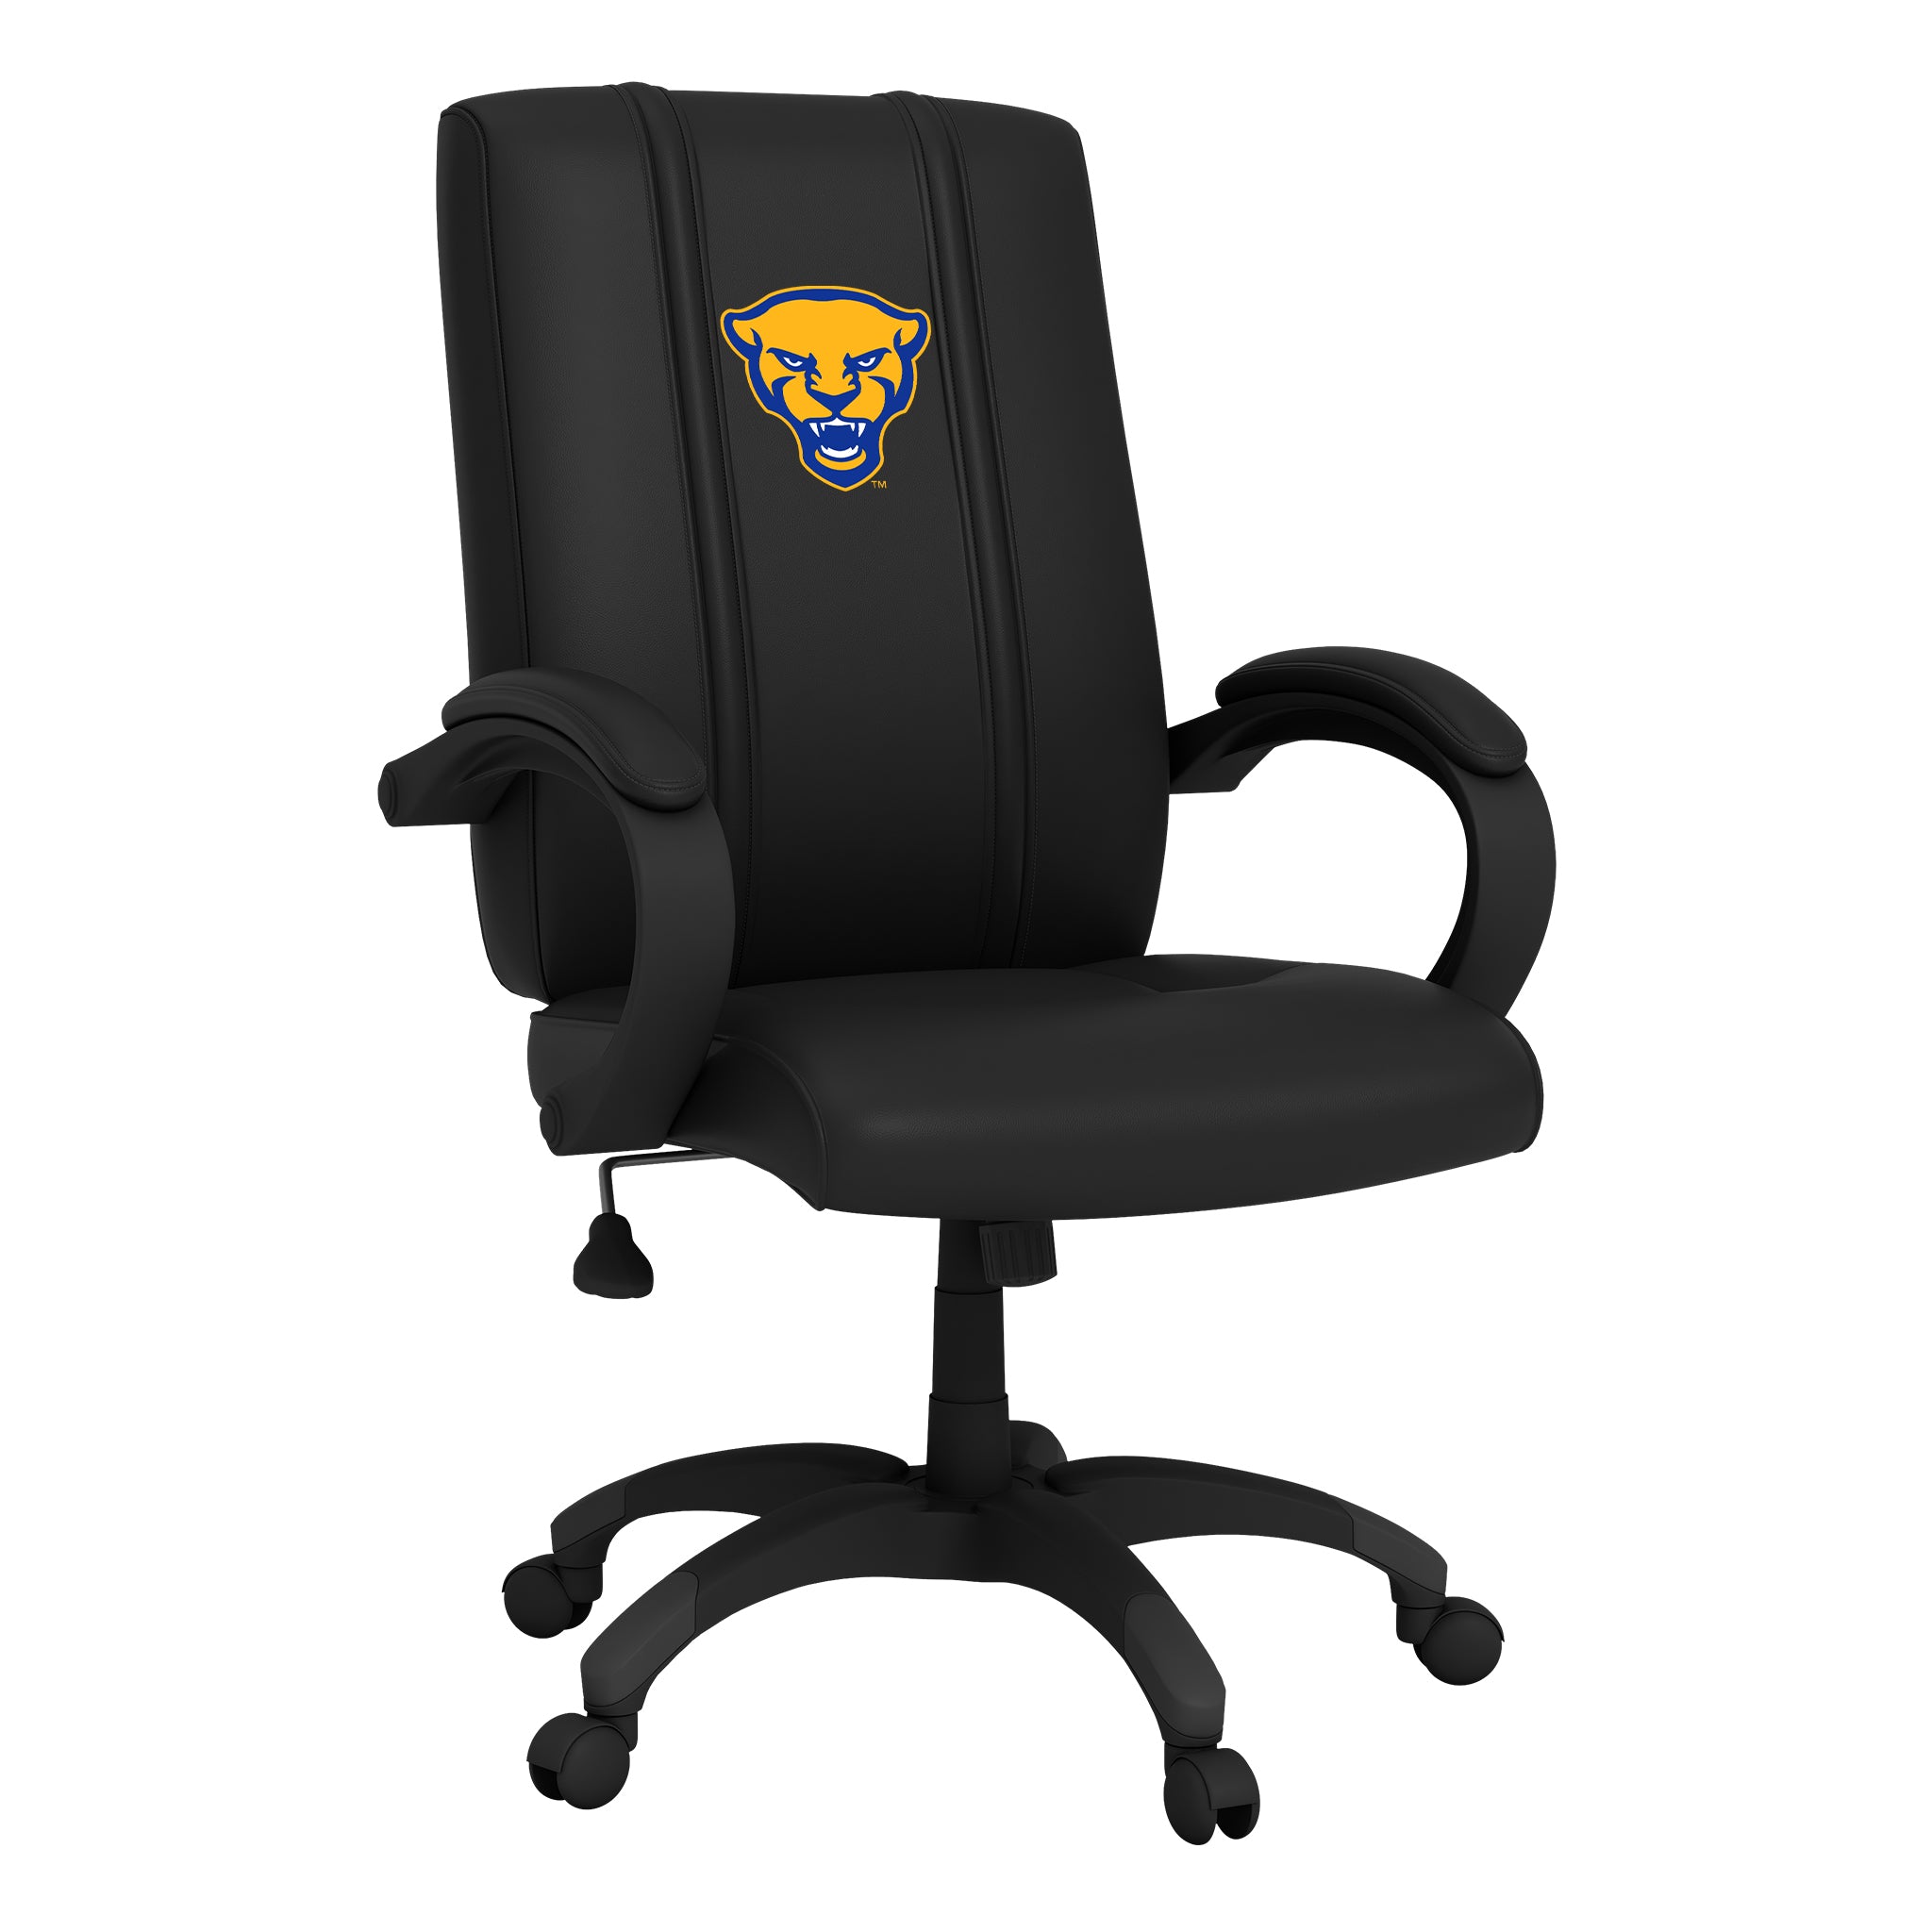 Pittsburgh Panthers Office Chair 1000 with Pittsburgh Panthers Alternate Logo